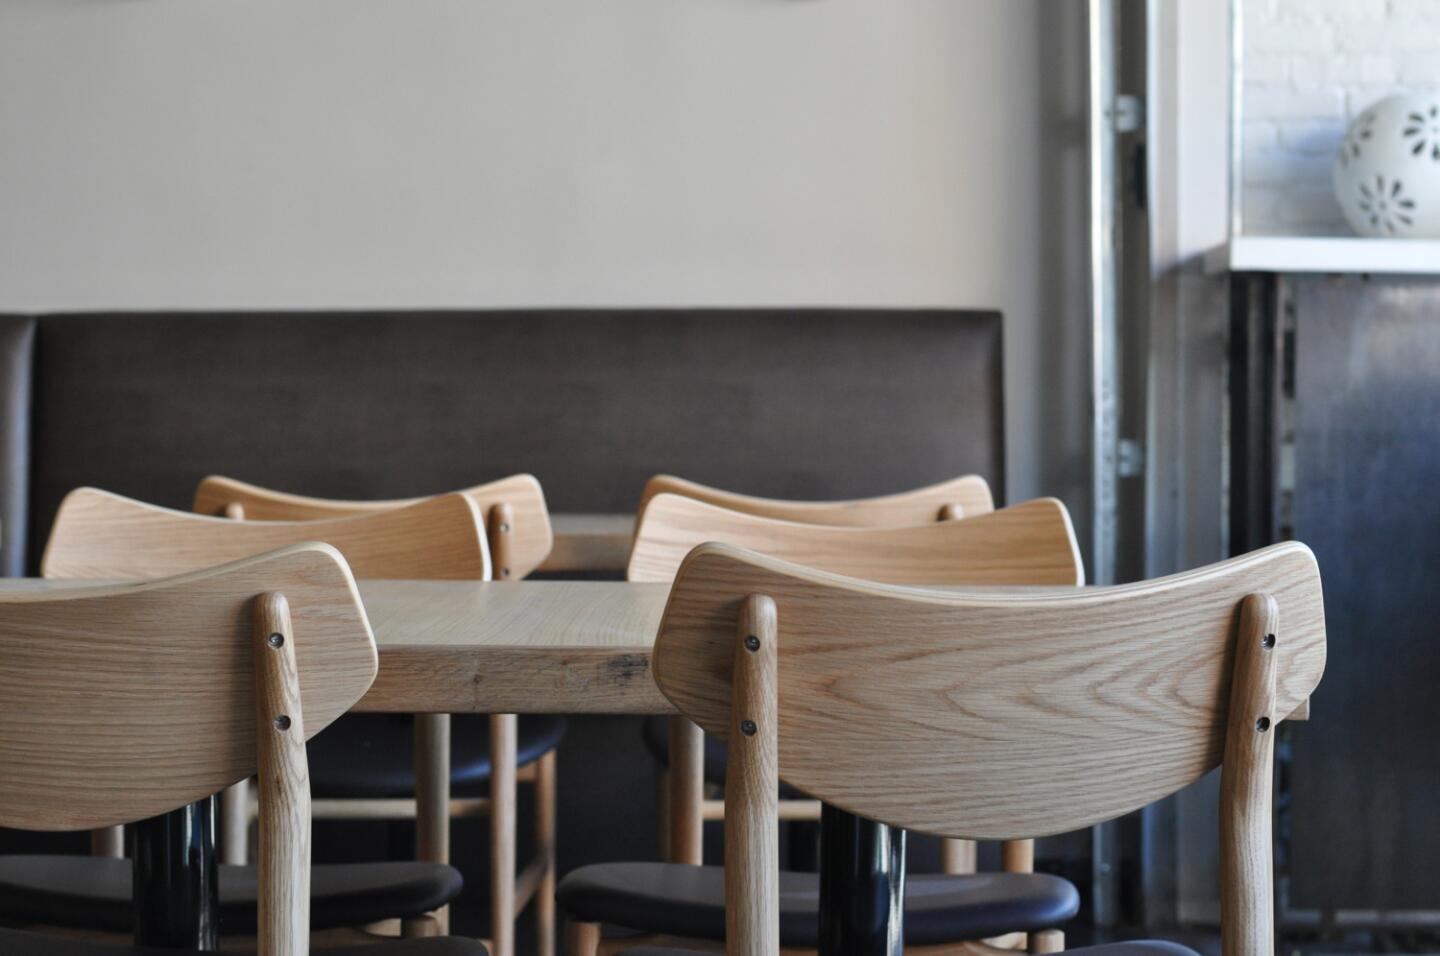 The pale wood chairs at Birch, Brendan Colliins' new Hollywood restaurant.